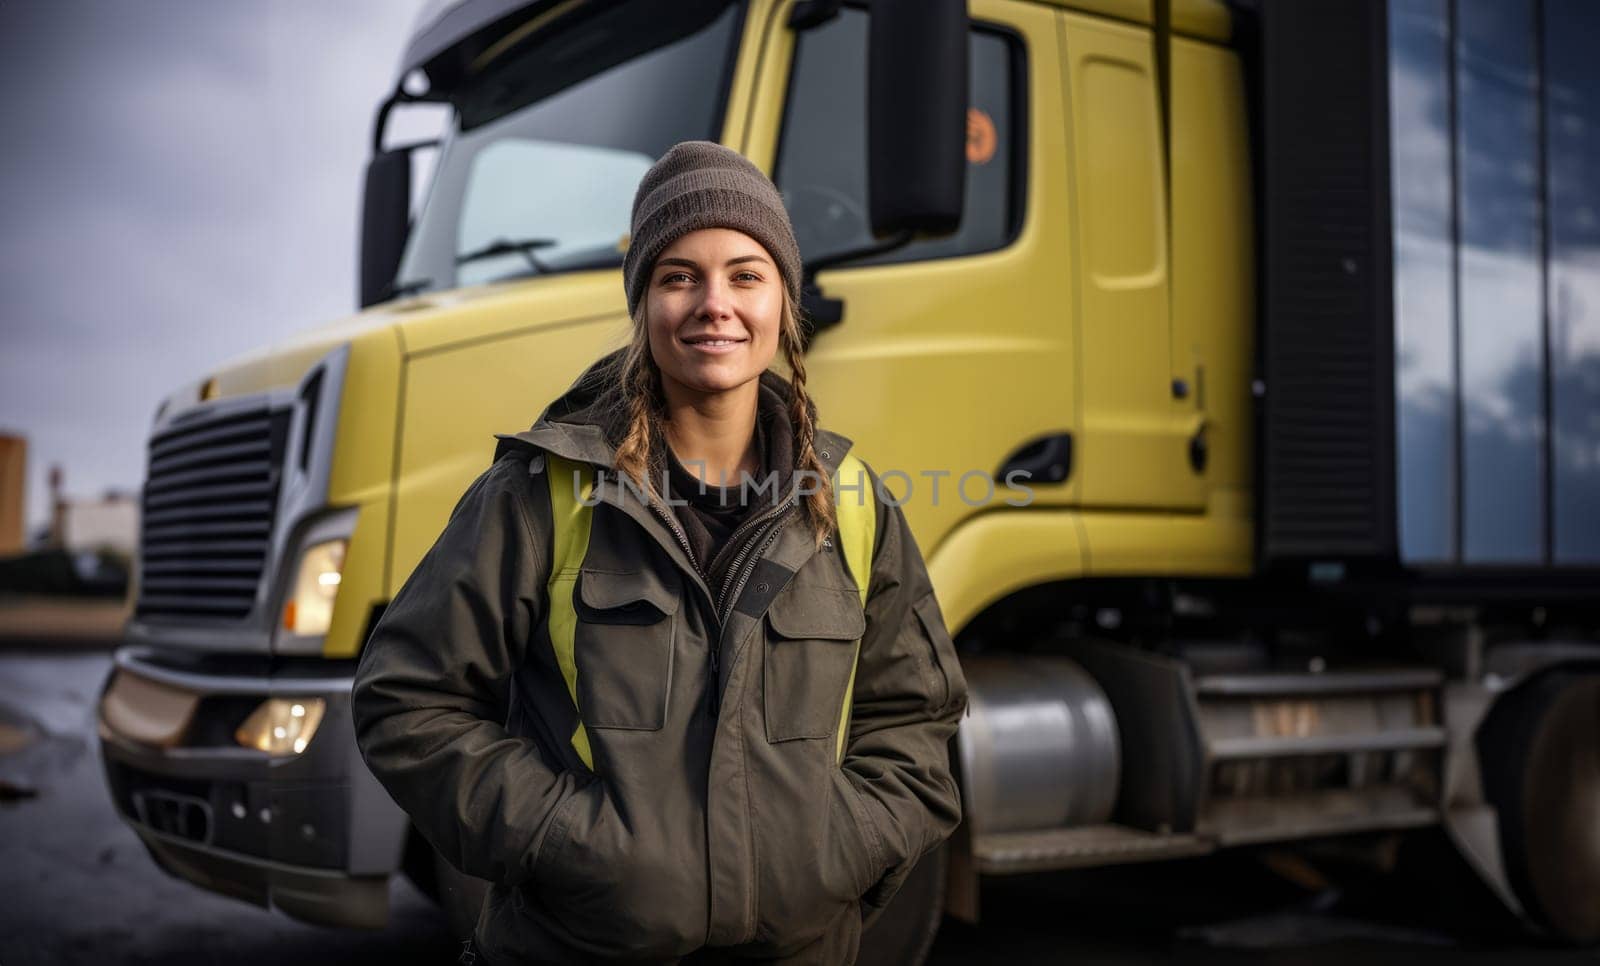 A woman trucker stands tall in front of her rig, a symbol of strength and determination.